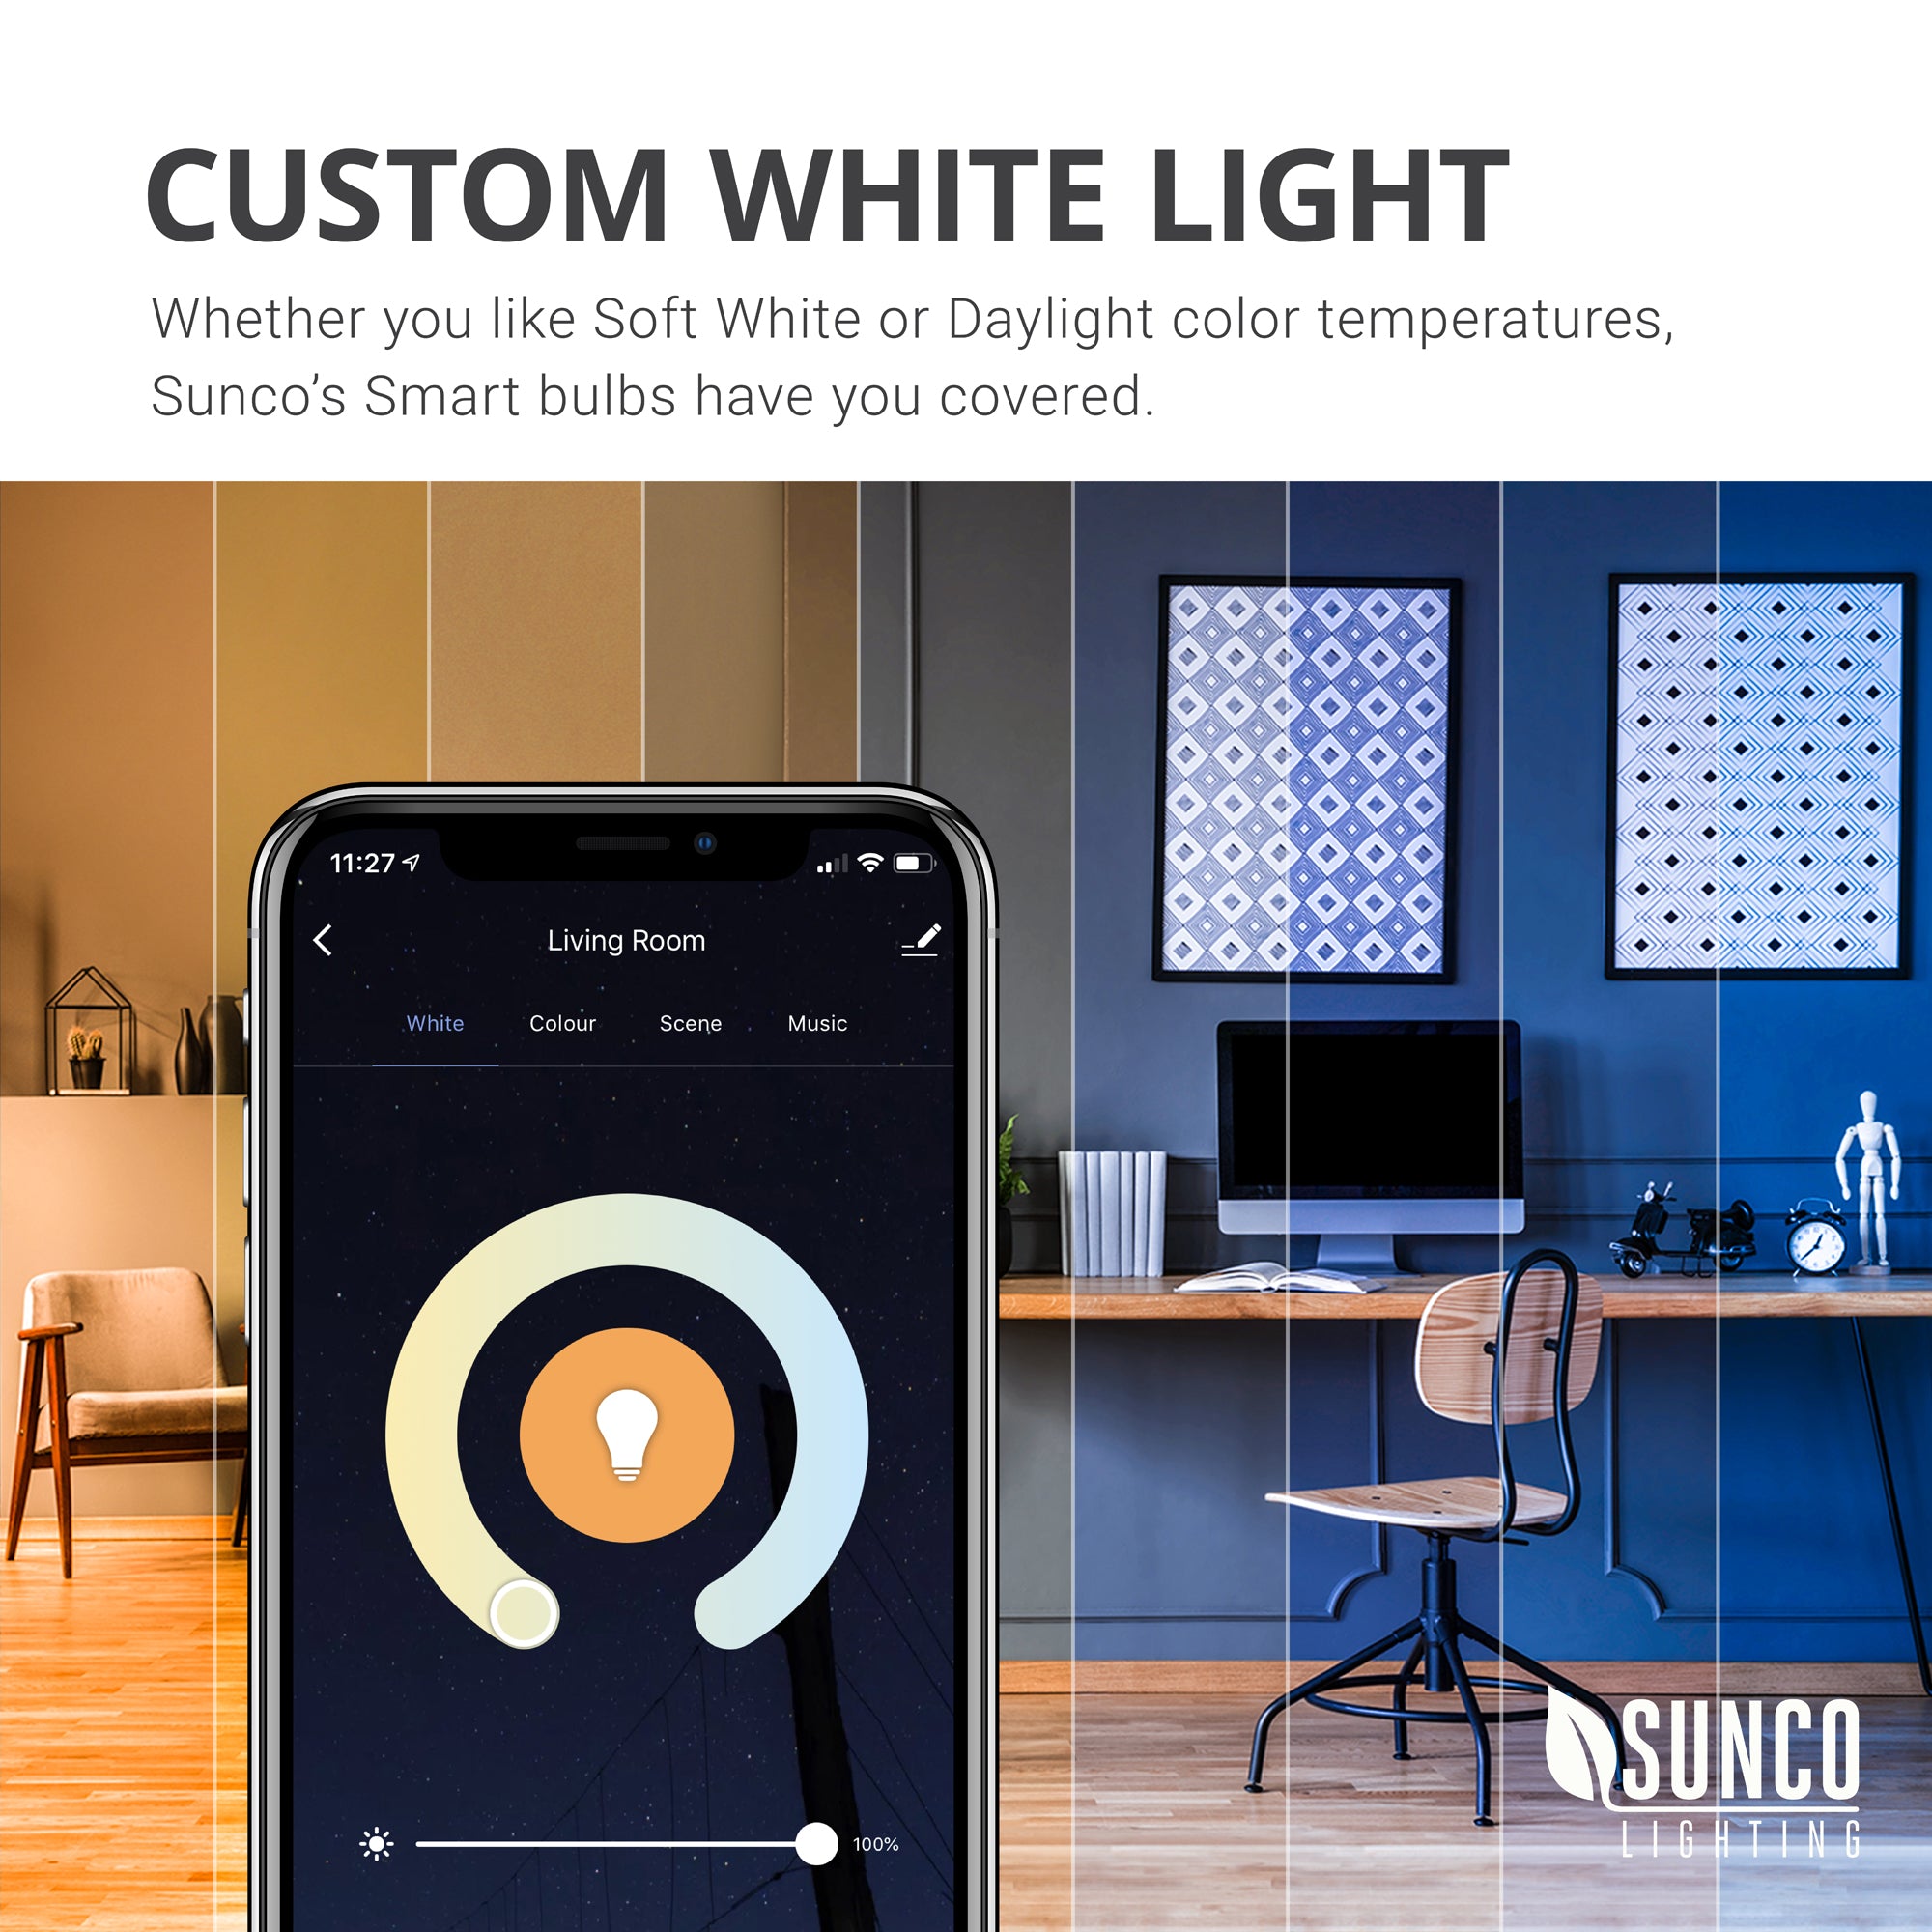 Custom White Light. Whether you light Soft White or Daylight color temperatures, to change from warm to cool white light, Sunco’s smart bulbs have you covered. With PAR38 LED Smart Bulb’s tunable white options you can select the warm or cool tone that best suits how you use a multipurpose room throughout the day. Image shows the app on a smart phone, a living room with warm, welcoming light and an work from home office with cooler, task lighting in a higher color temperature selected.